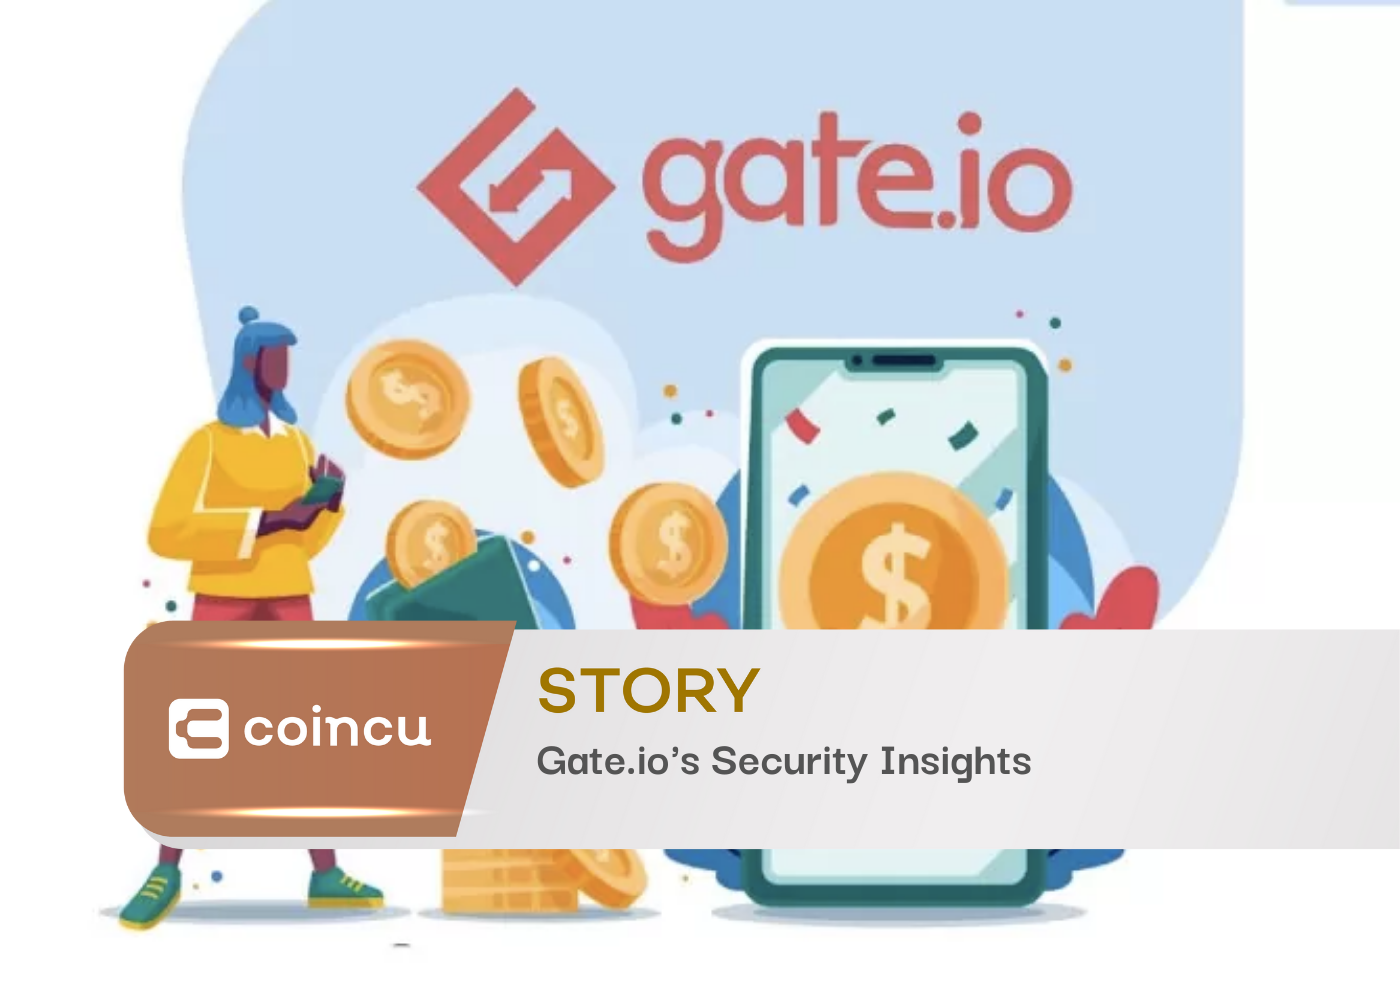 Gate.io's Security Insights